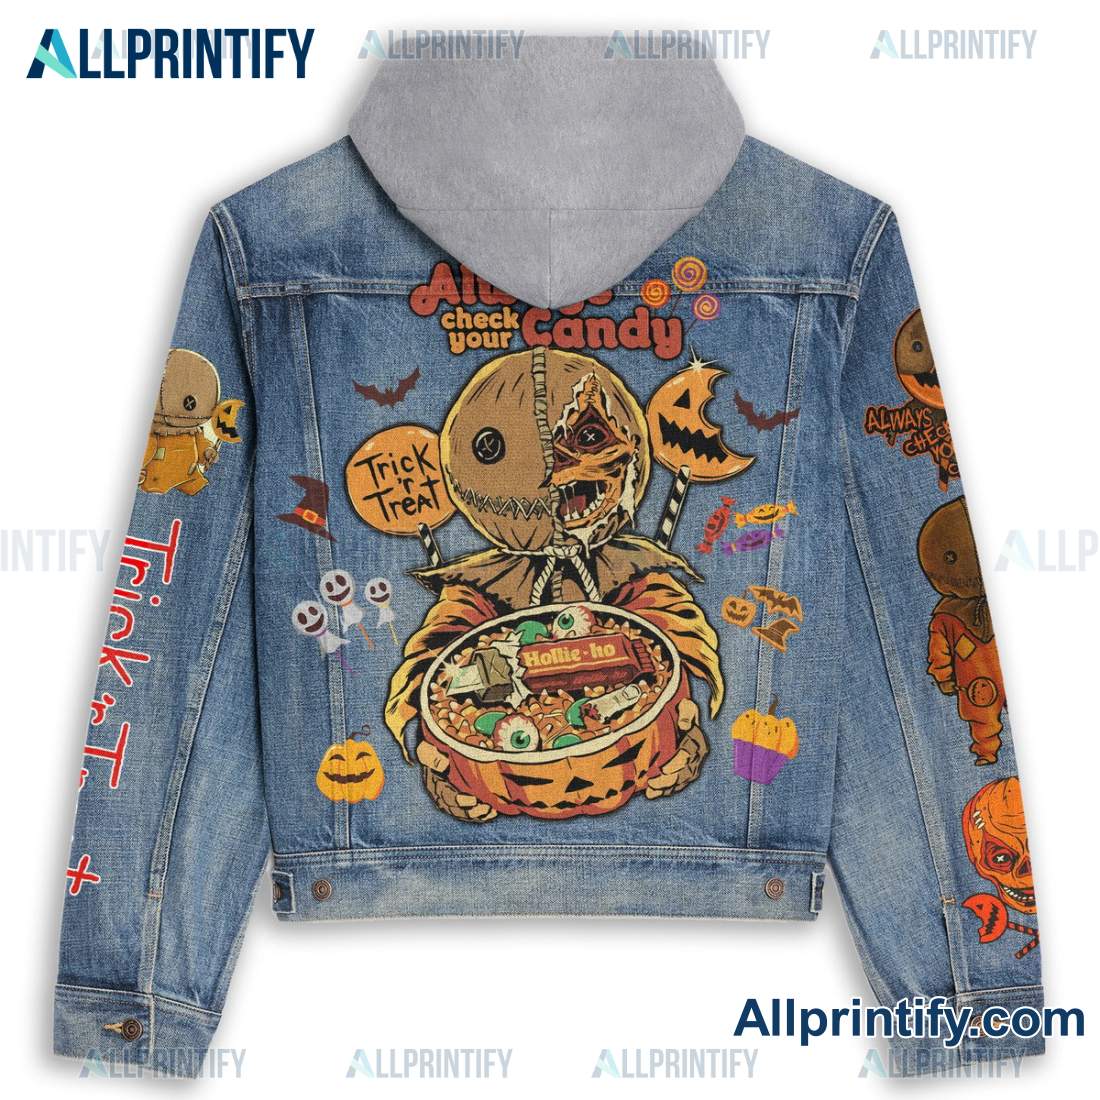 Trick R' Treat Always Check Your Candy Jean Jacket Hoodie c